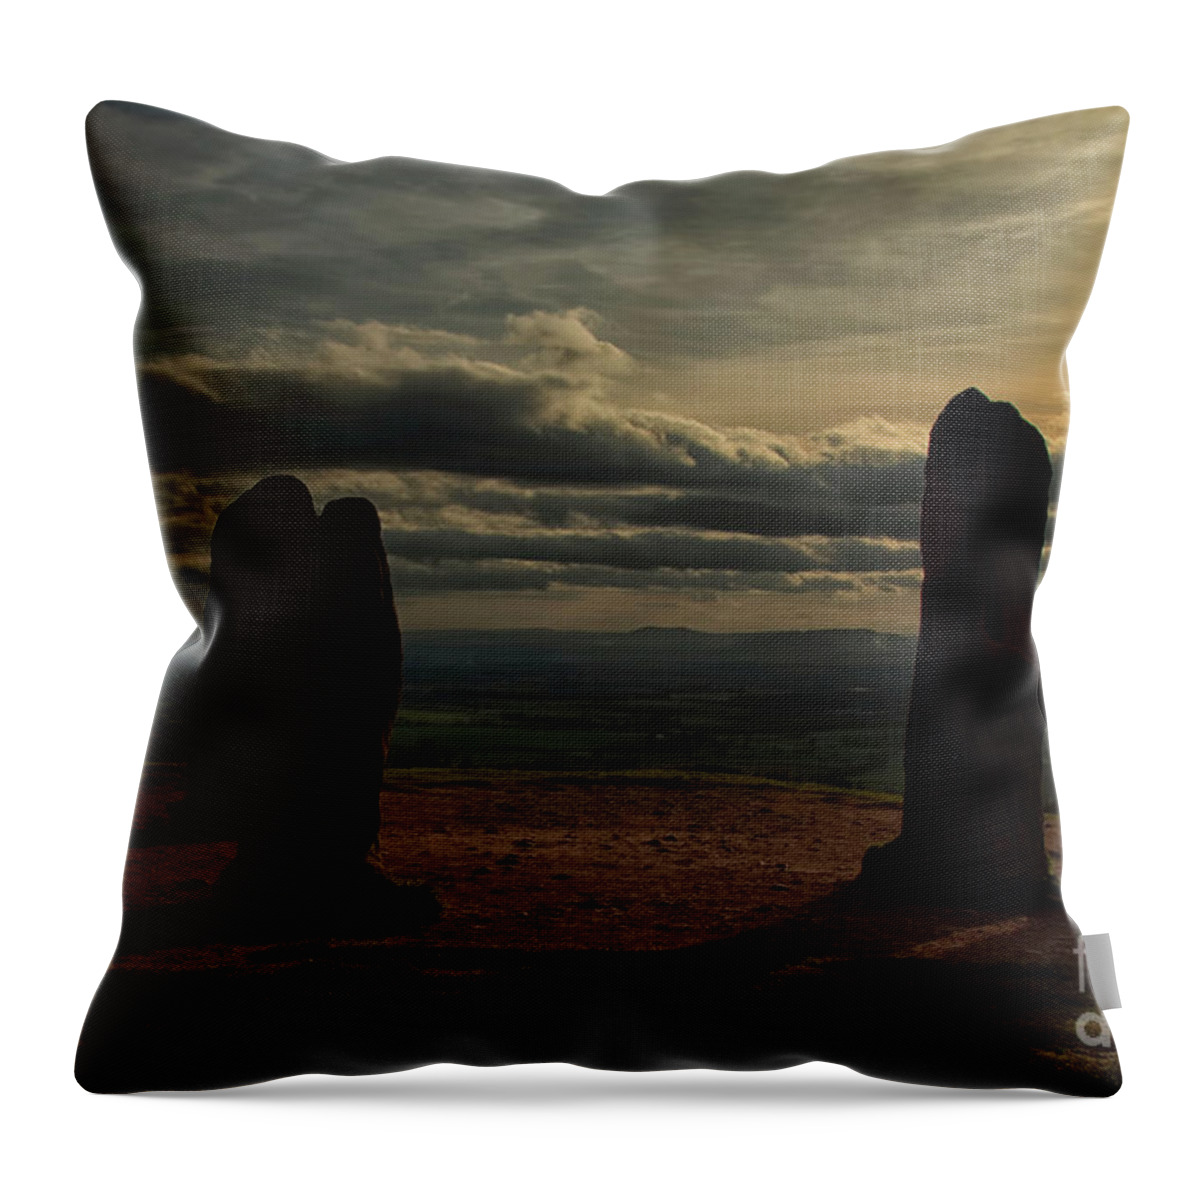 Monument Throw Pillow featuring the photograph Clent Hills Folly by Stephen Melia